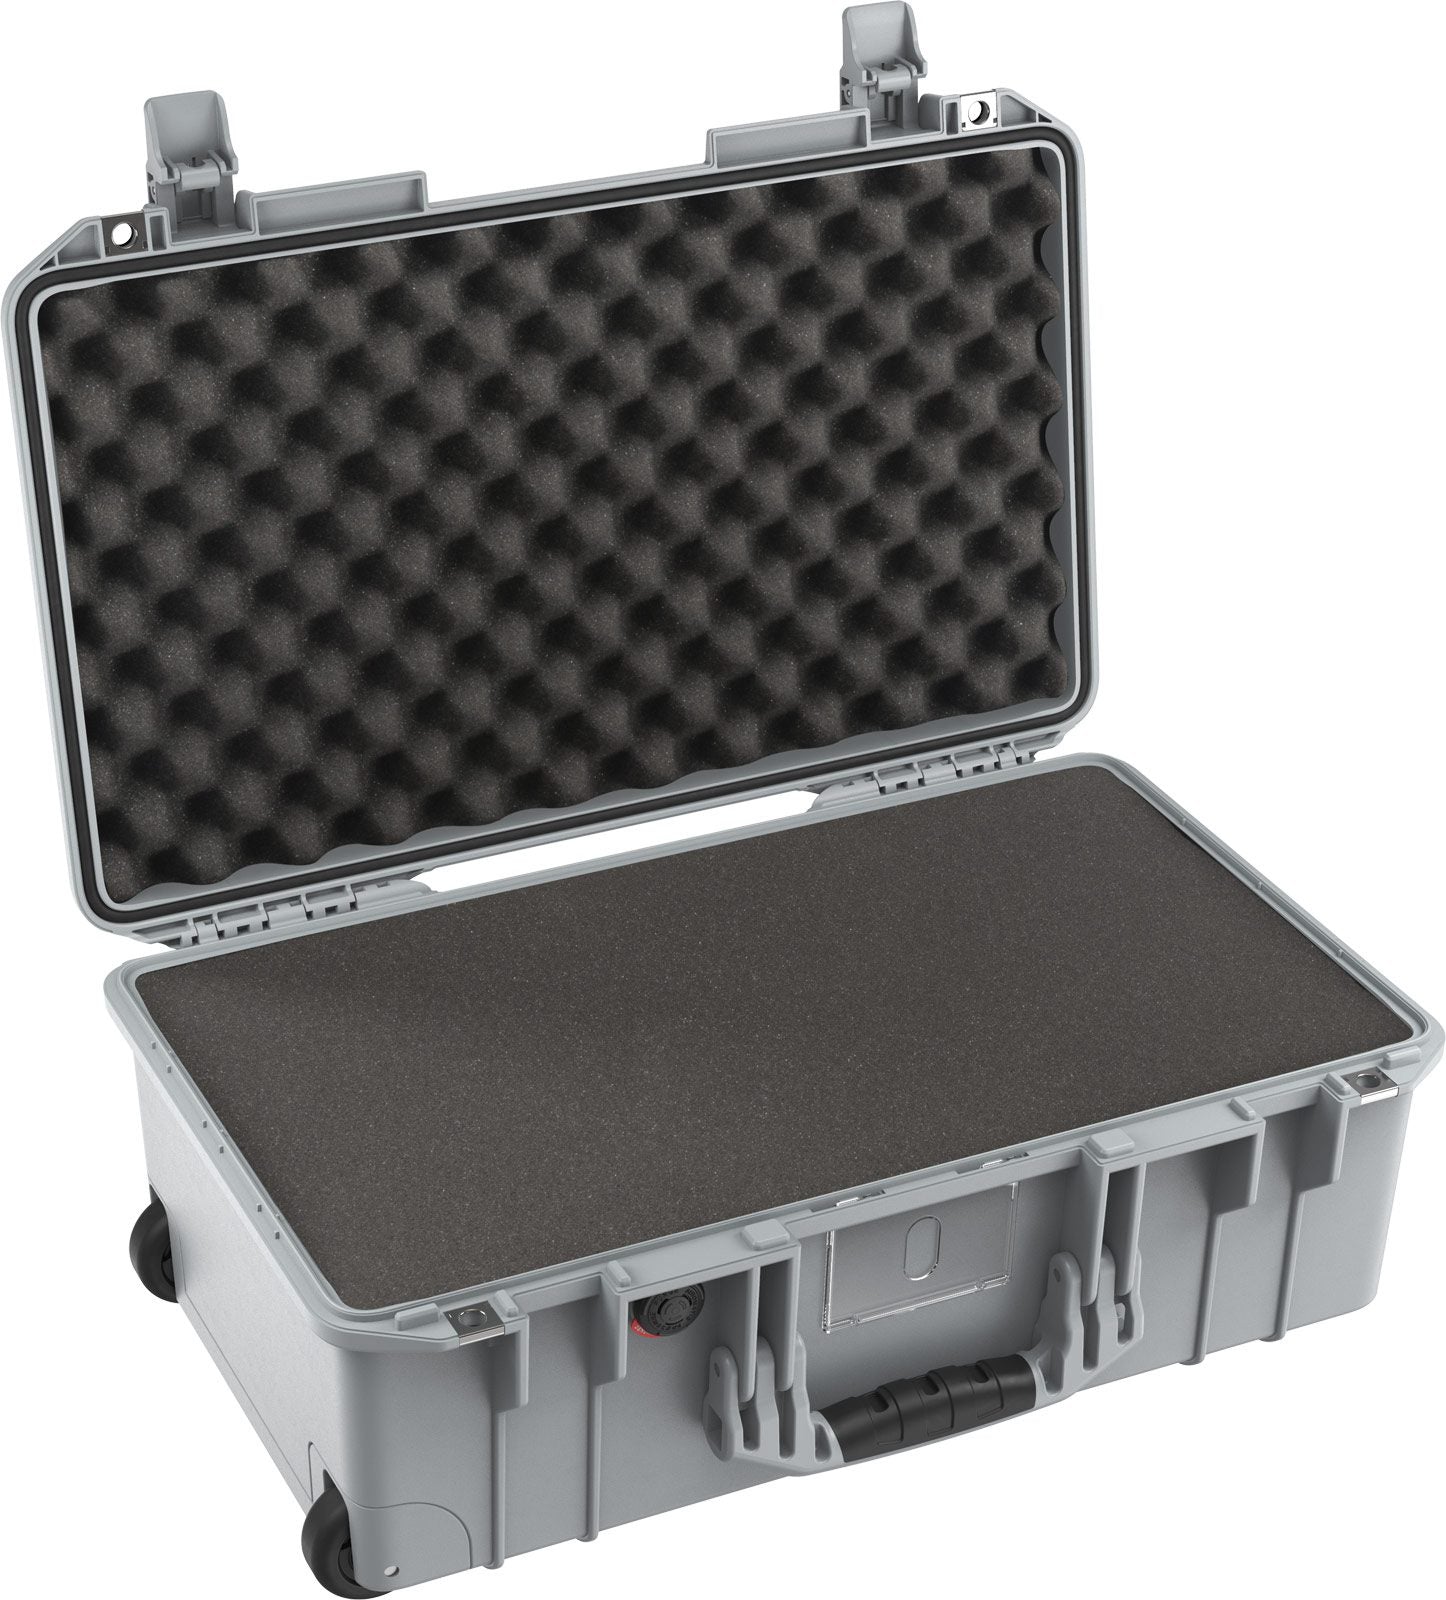 Pelican Products 1535 Air Carry-On Case - Silver, Foam